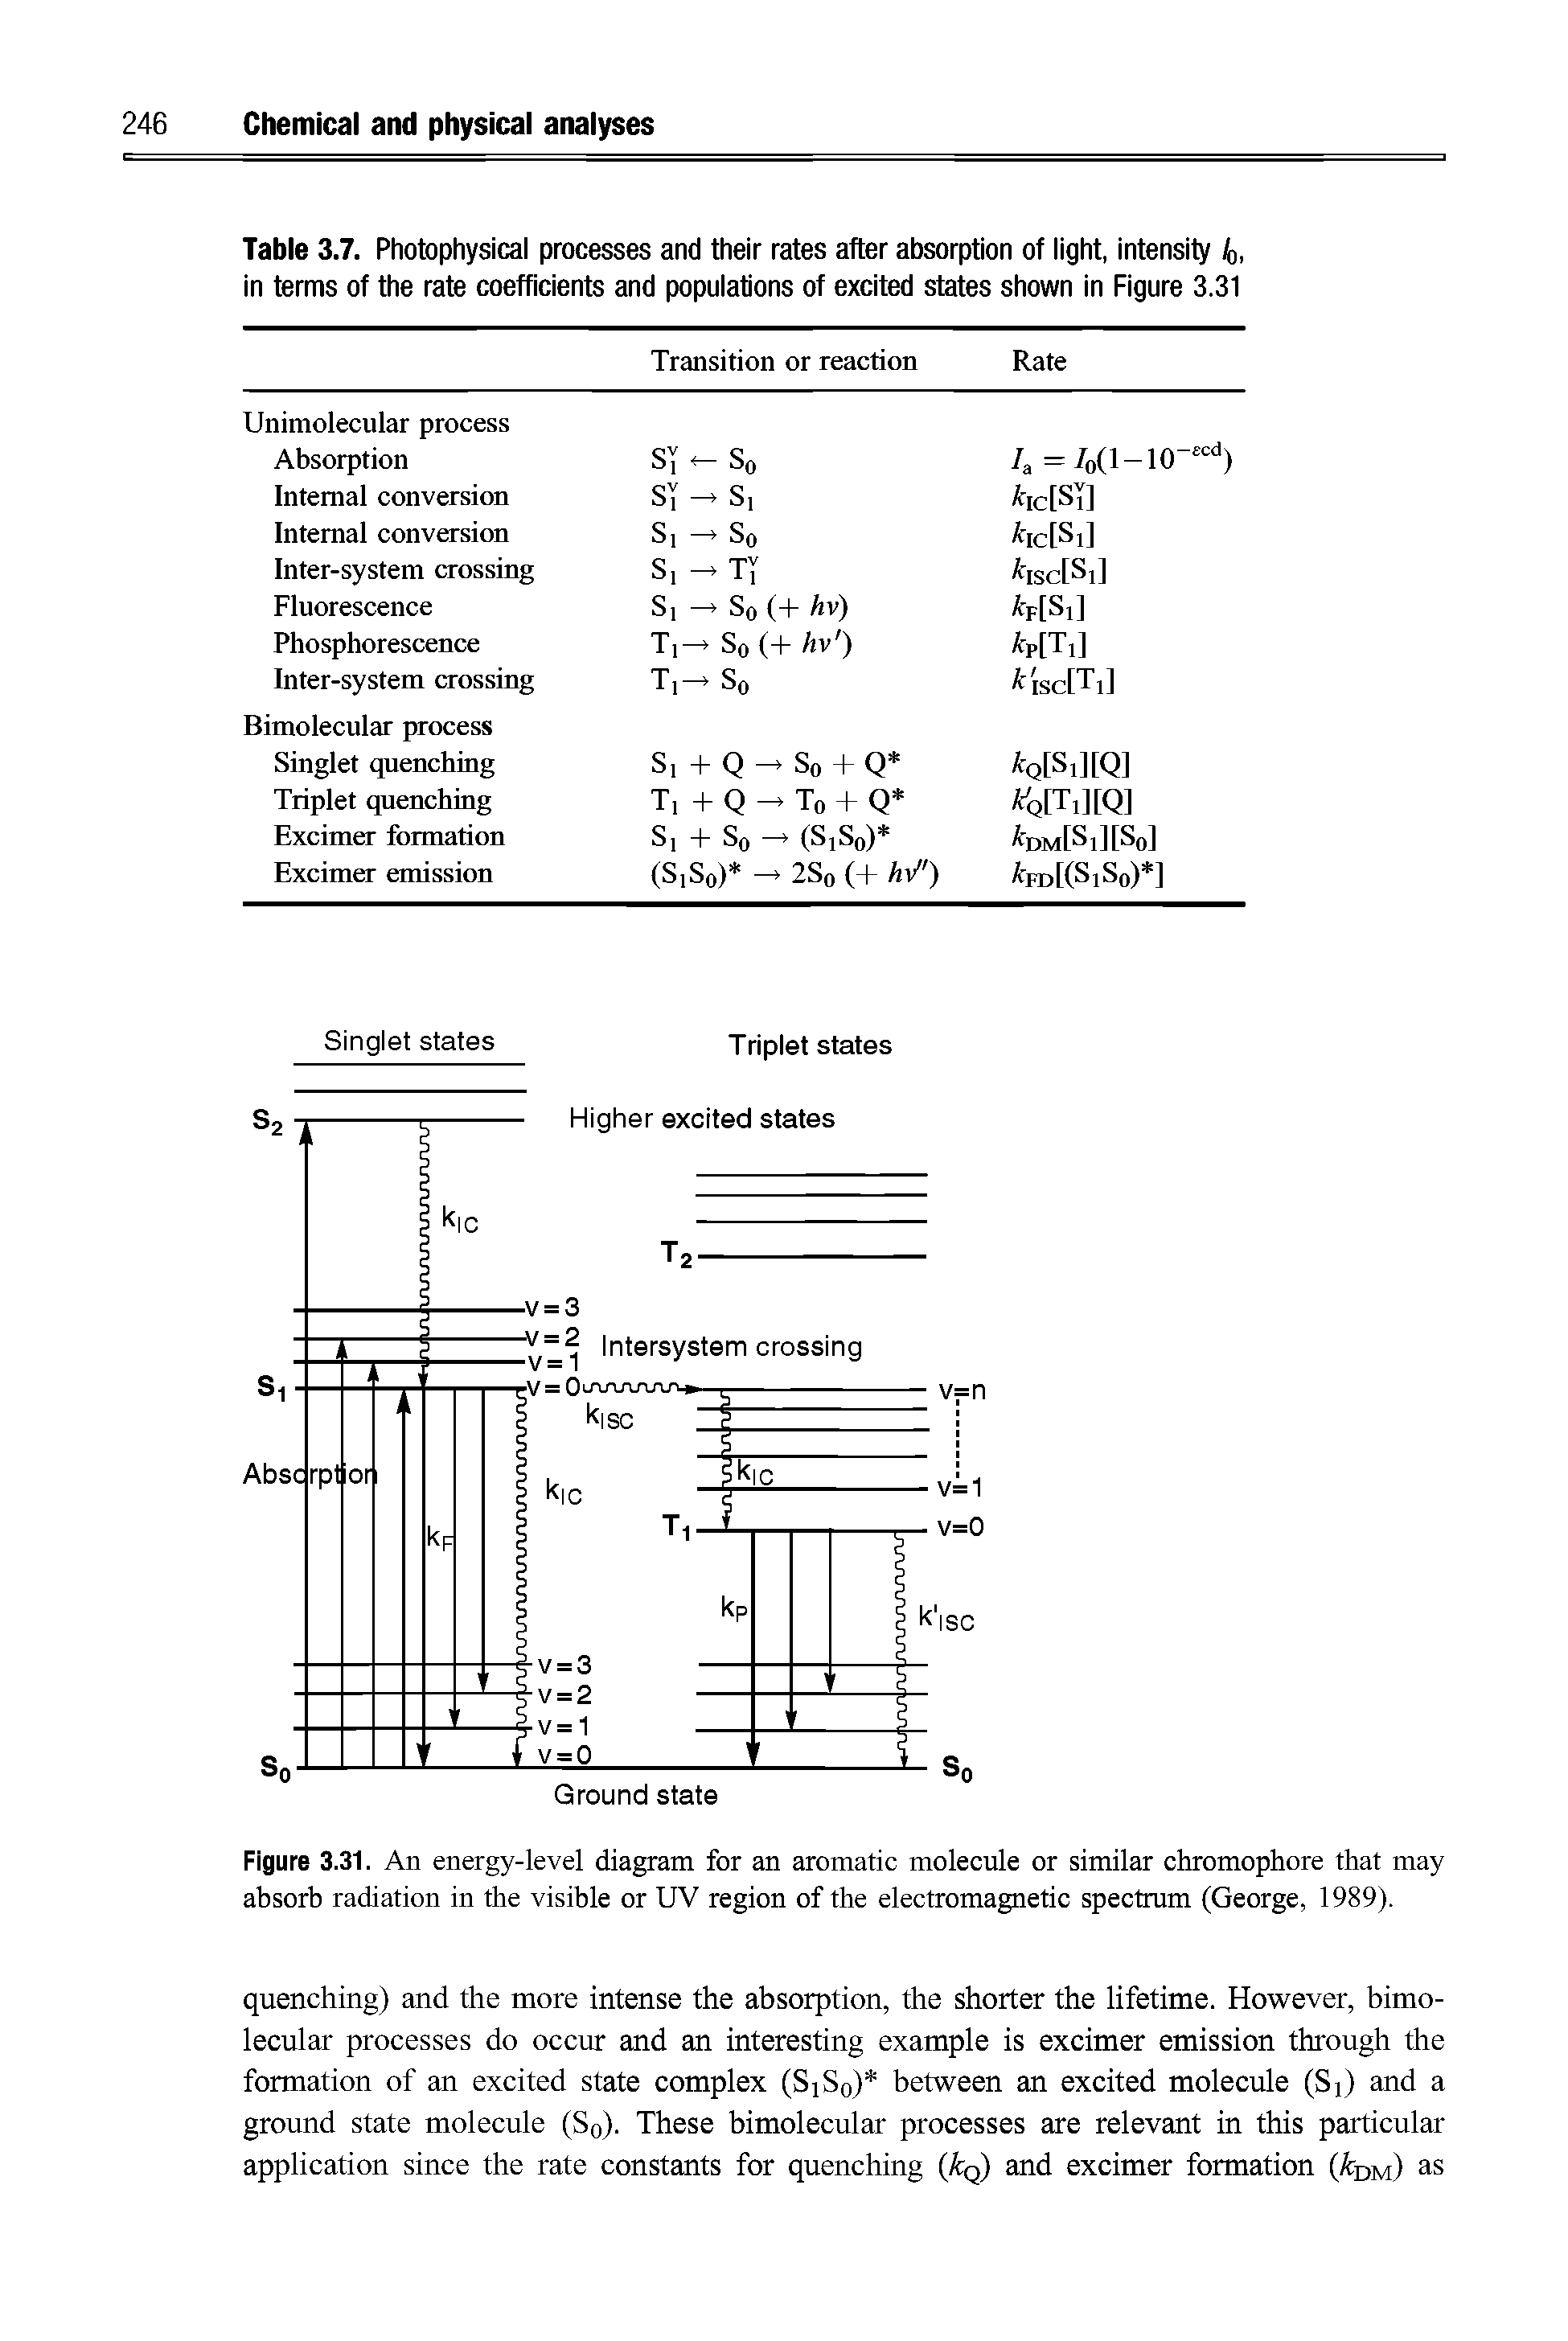 Figure 3.31. An energy-level diagram for an aromatic molecule or similar chromophore that may absorb radiation in the visible or UV region of the electromagnetic spectrum (George, 1989).